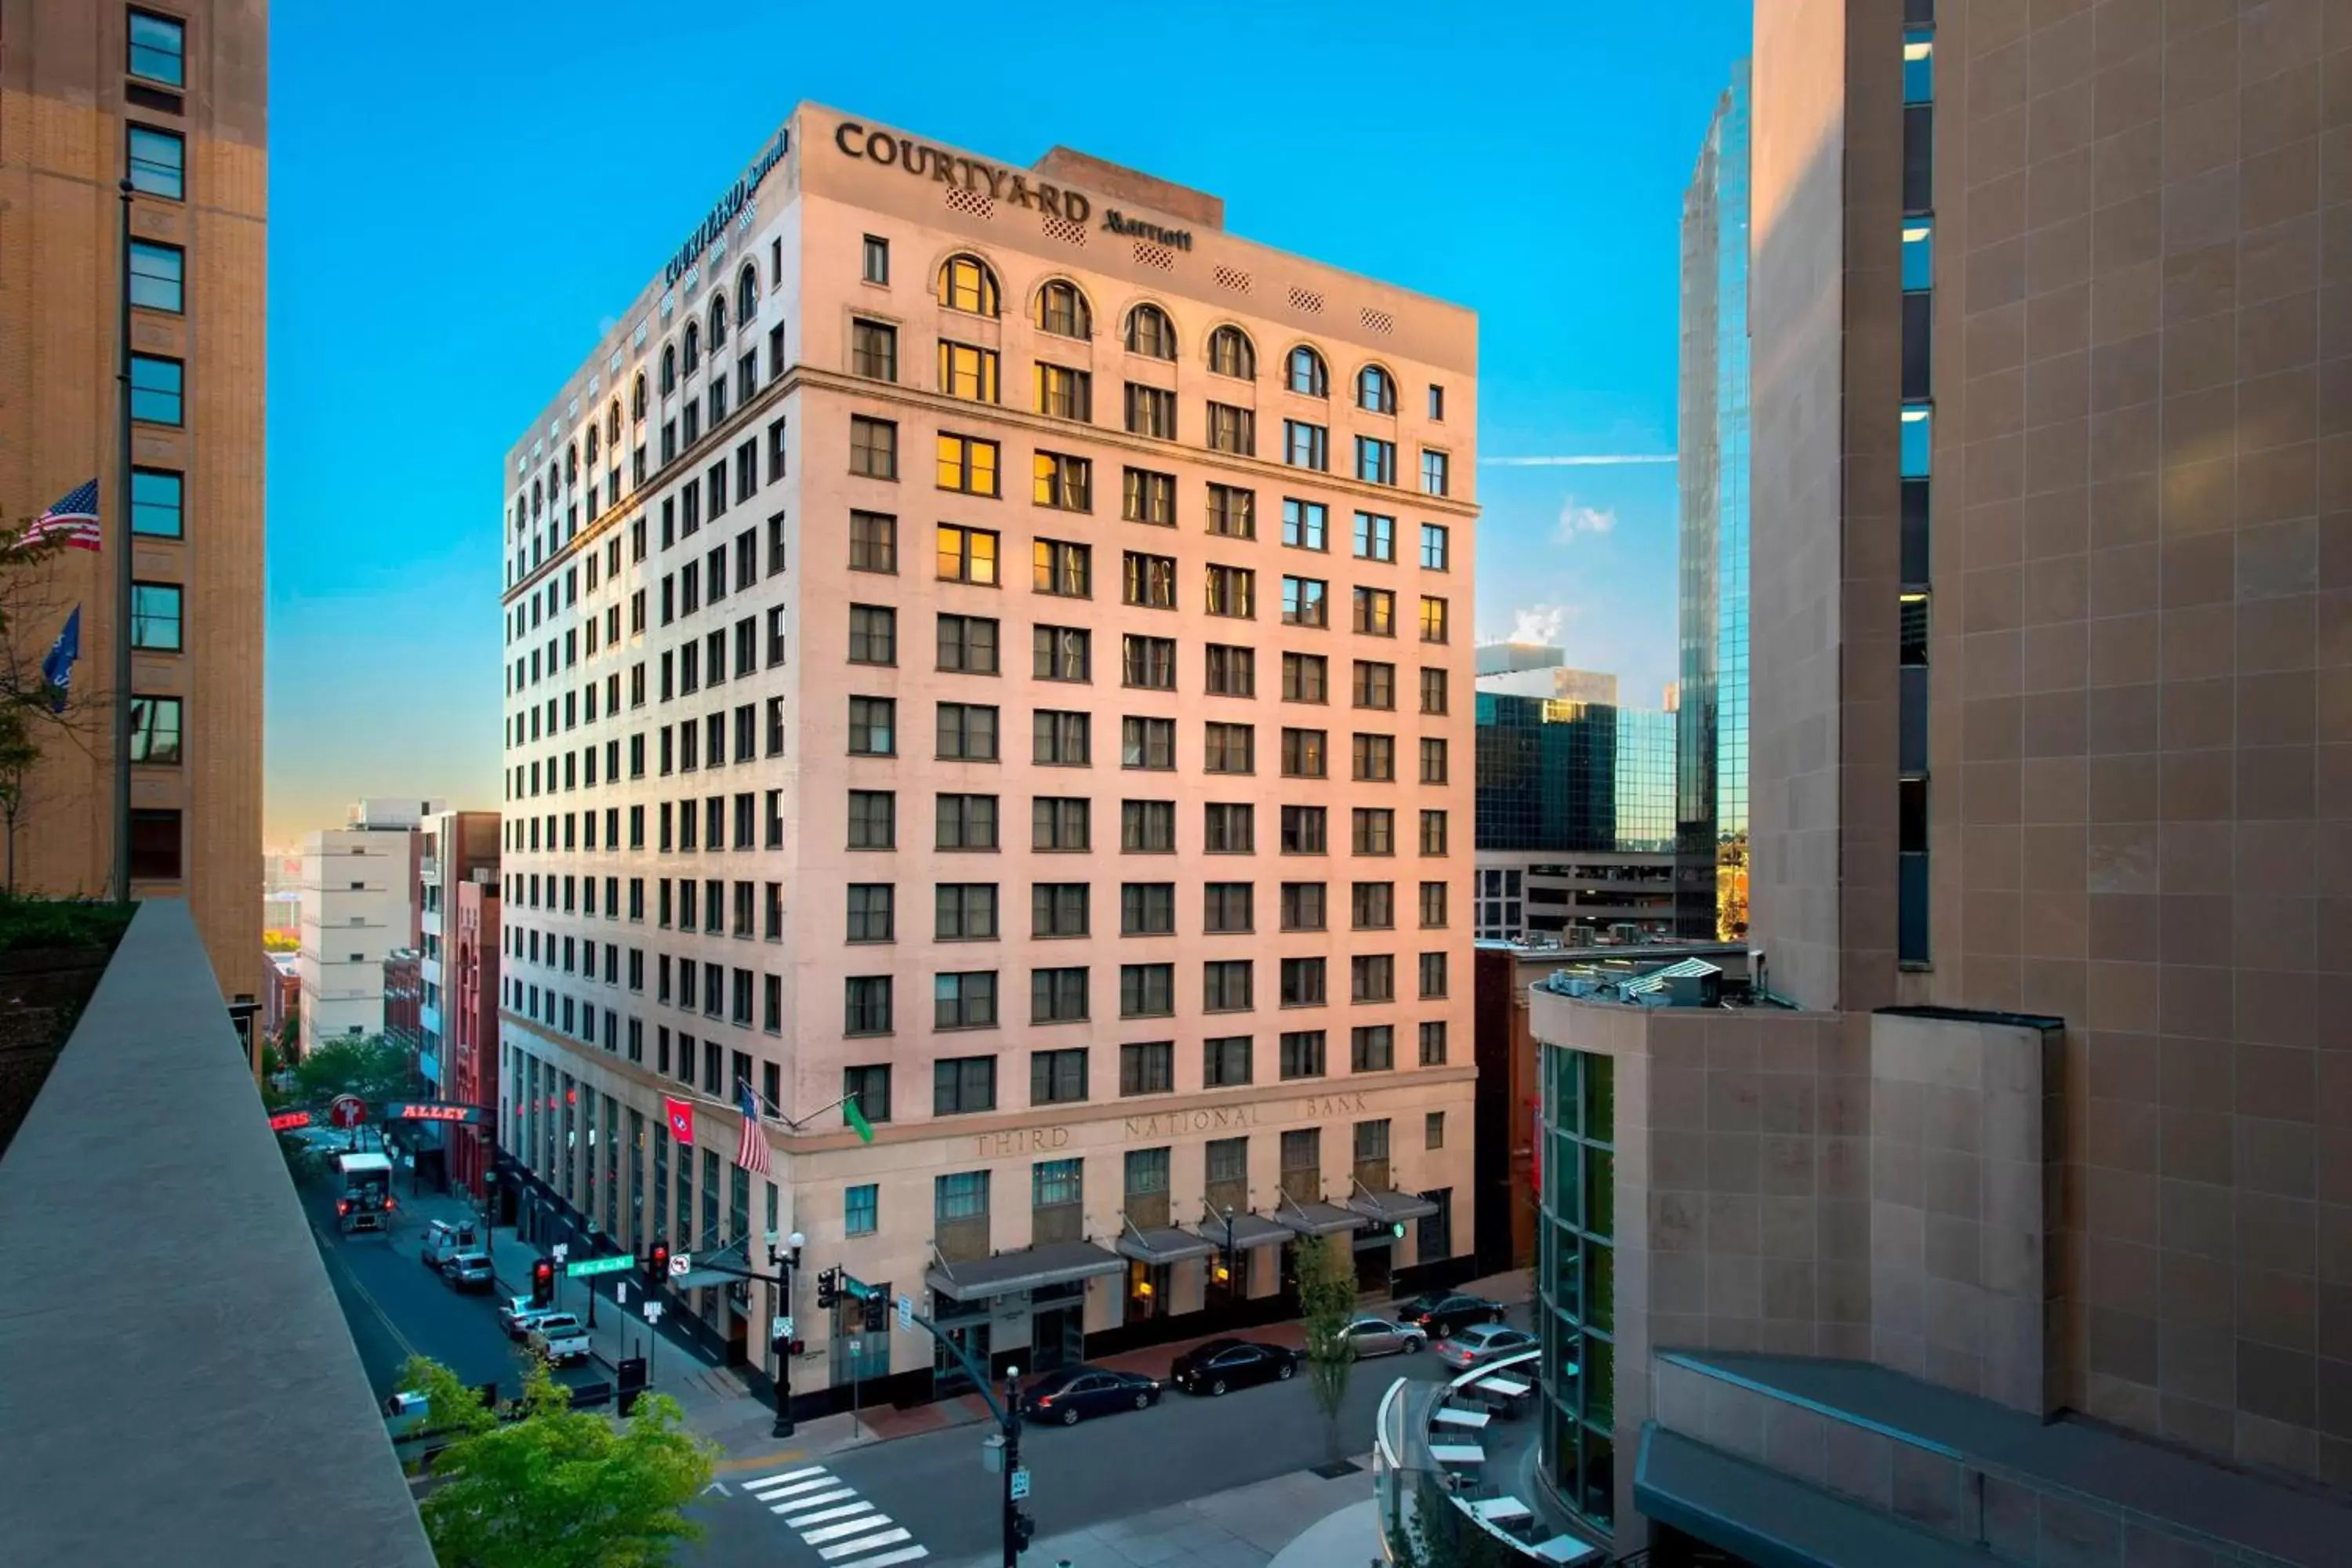 Property Building in Courtyard by Marriott Nashville Downtown